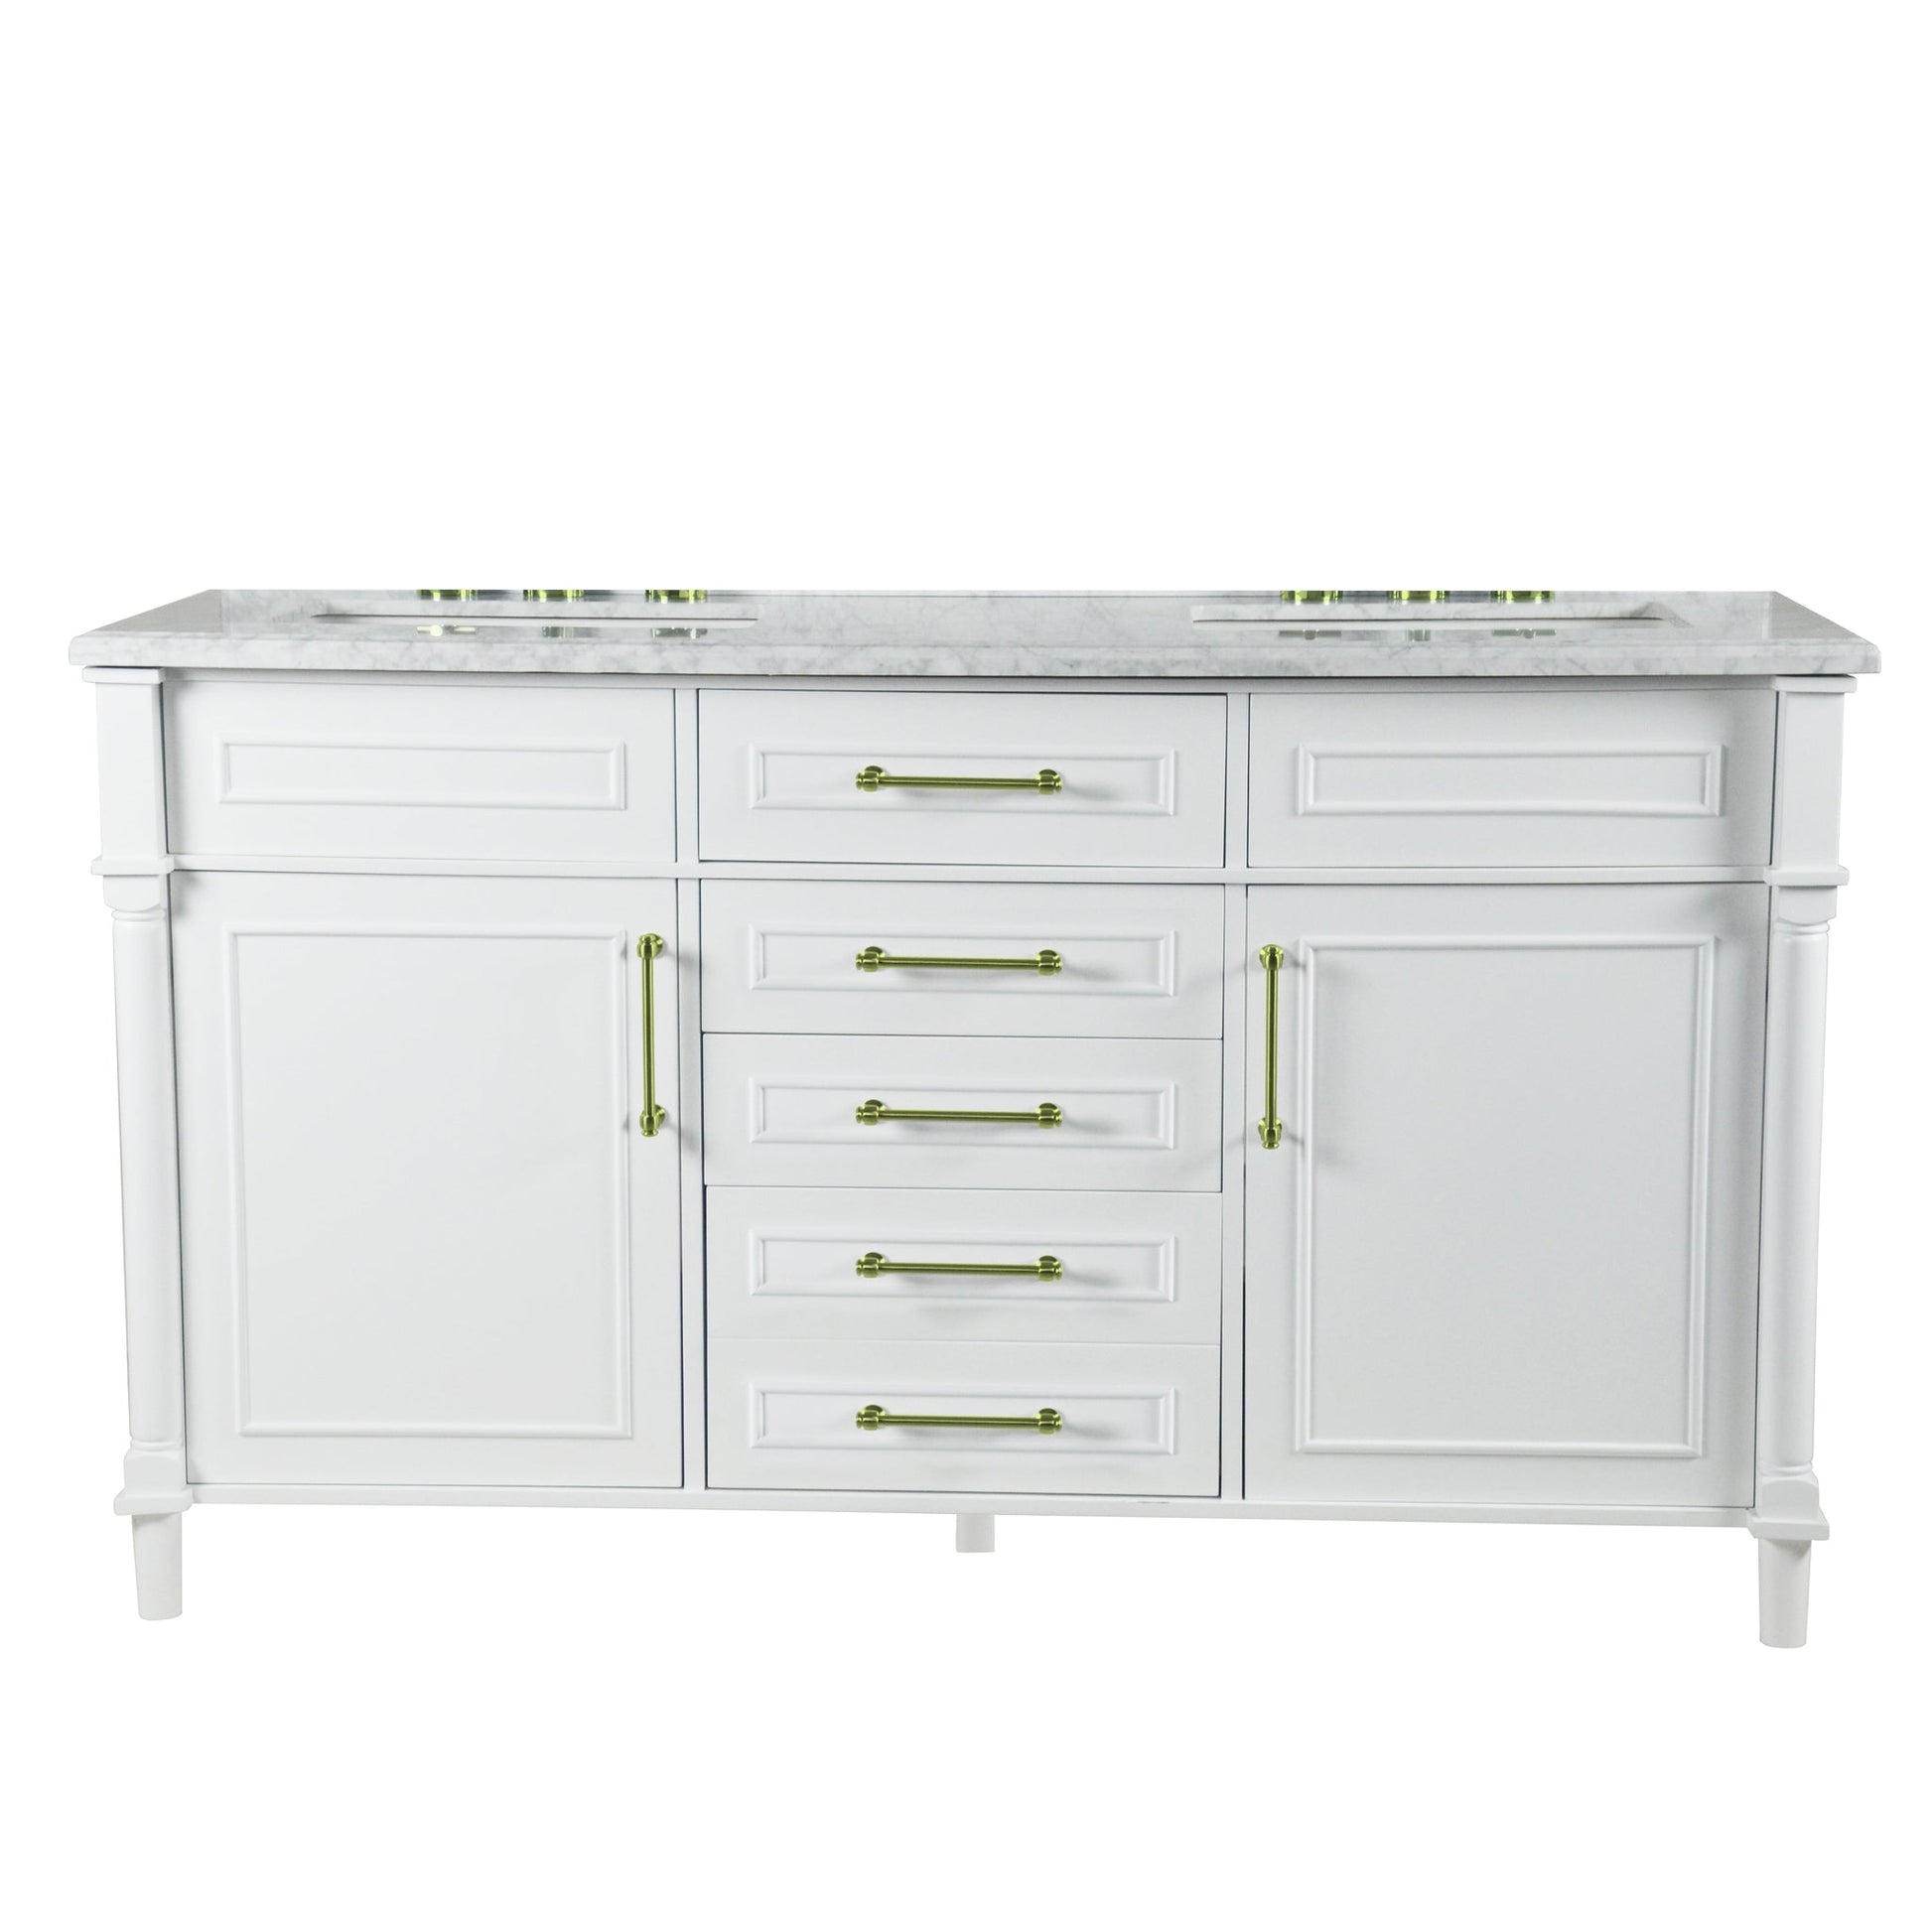 Bellaterra Home Napa 60" 2-Door 4-Drawer White Freestanding Vanity Set With Ceramic Undermount Rectangular Sink and White Carrara Marble Top, and Gold Hardware